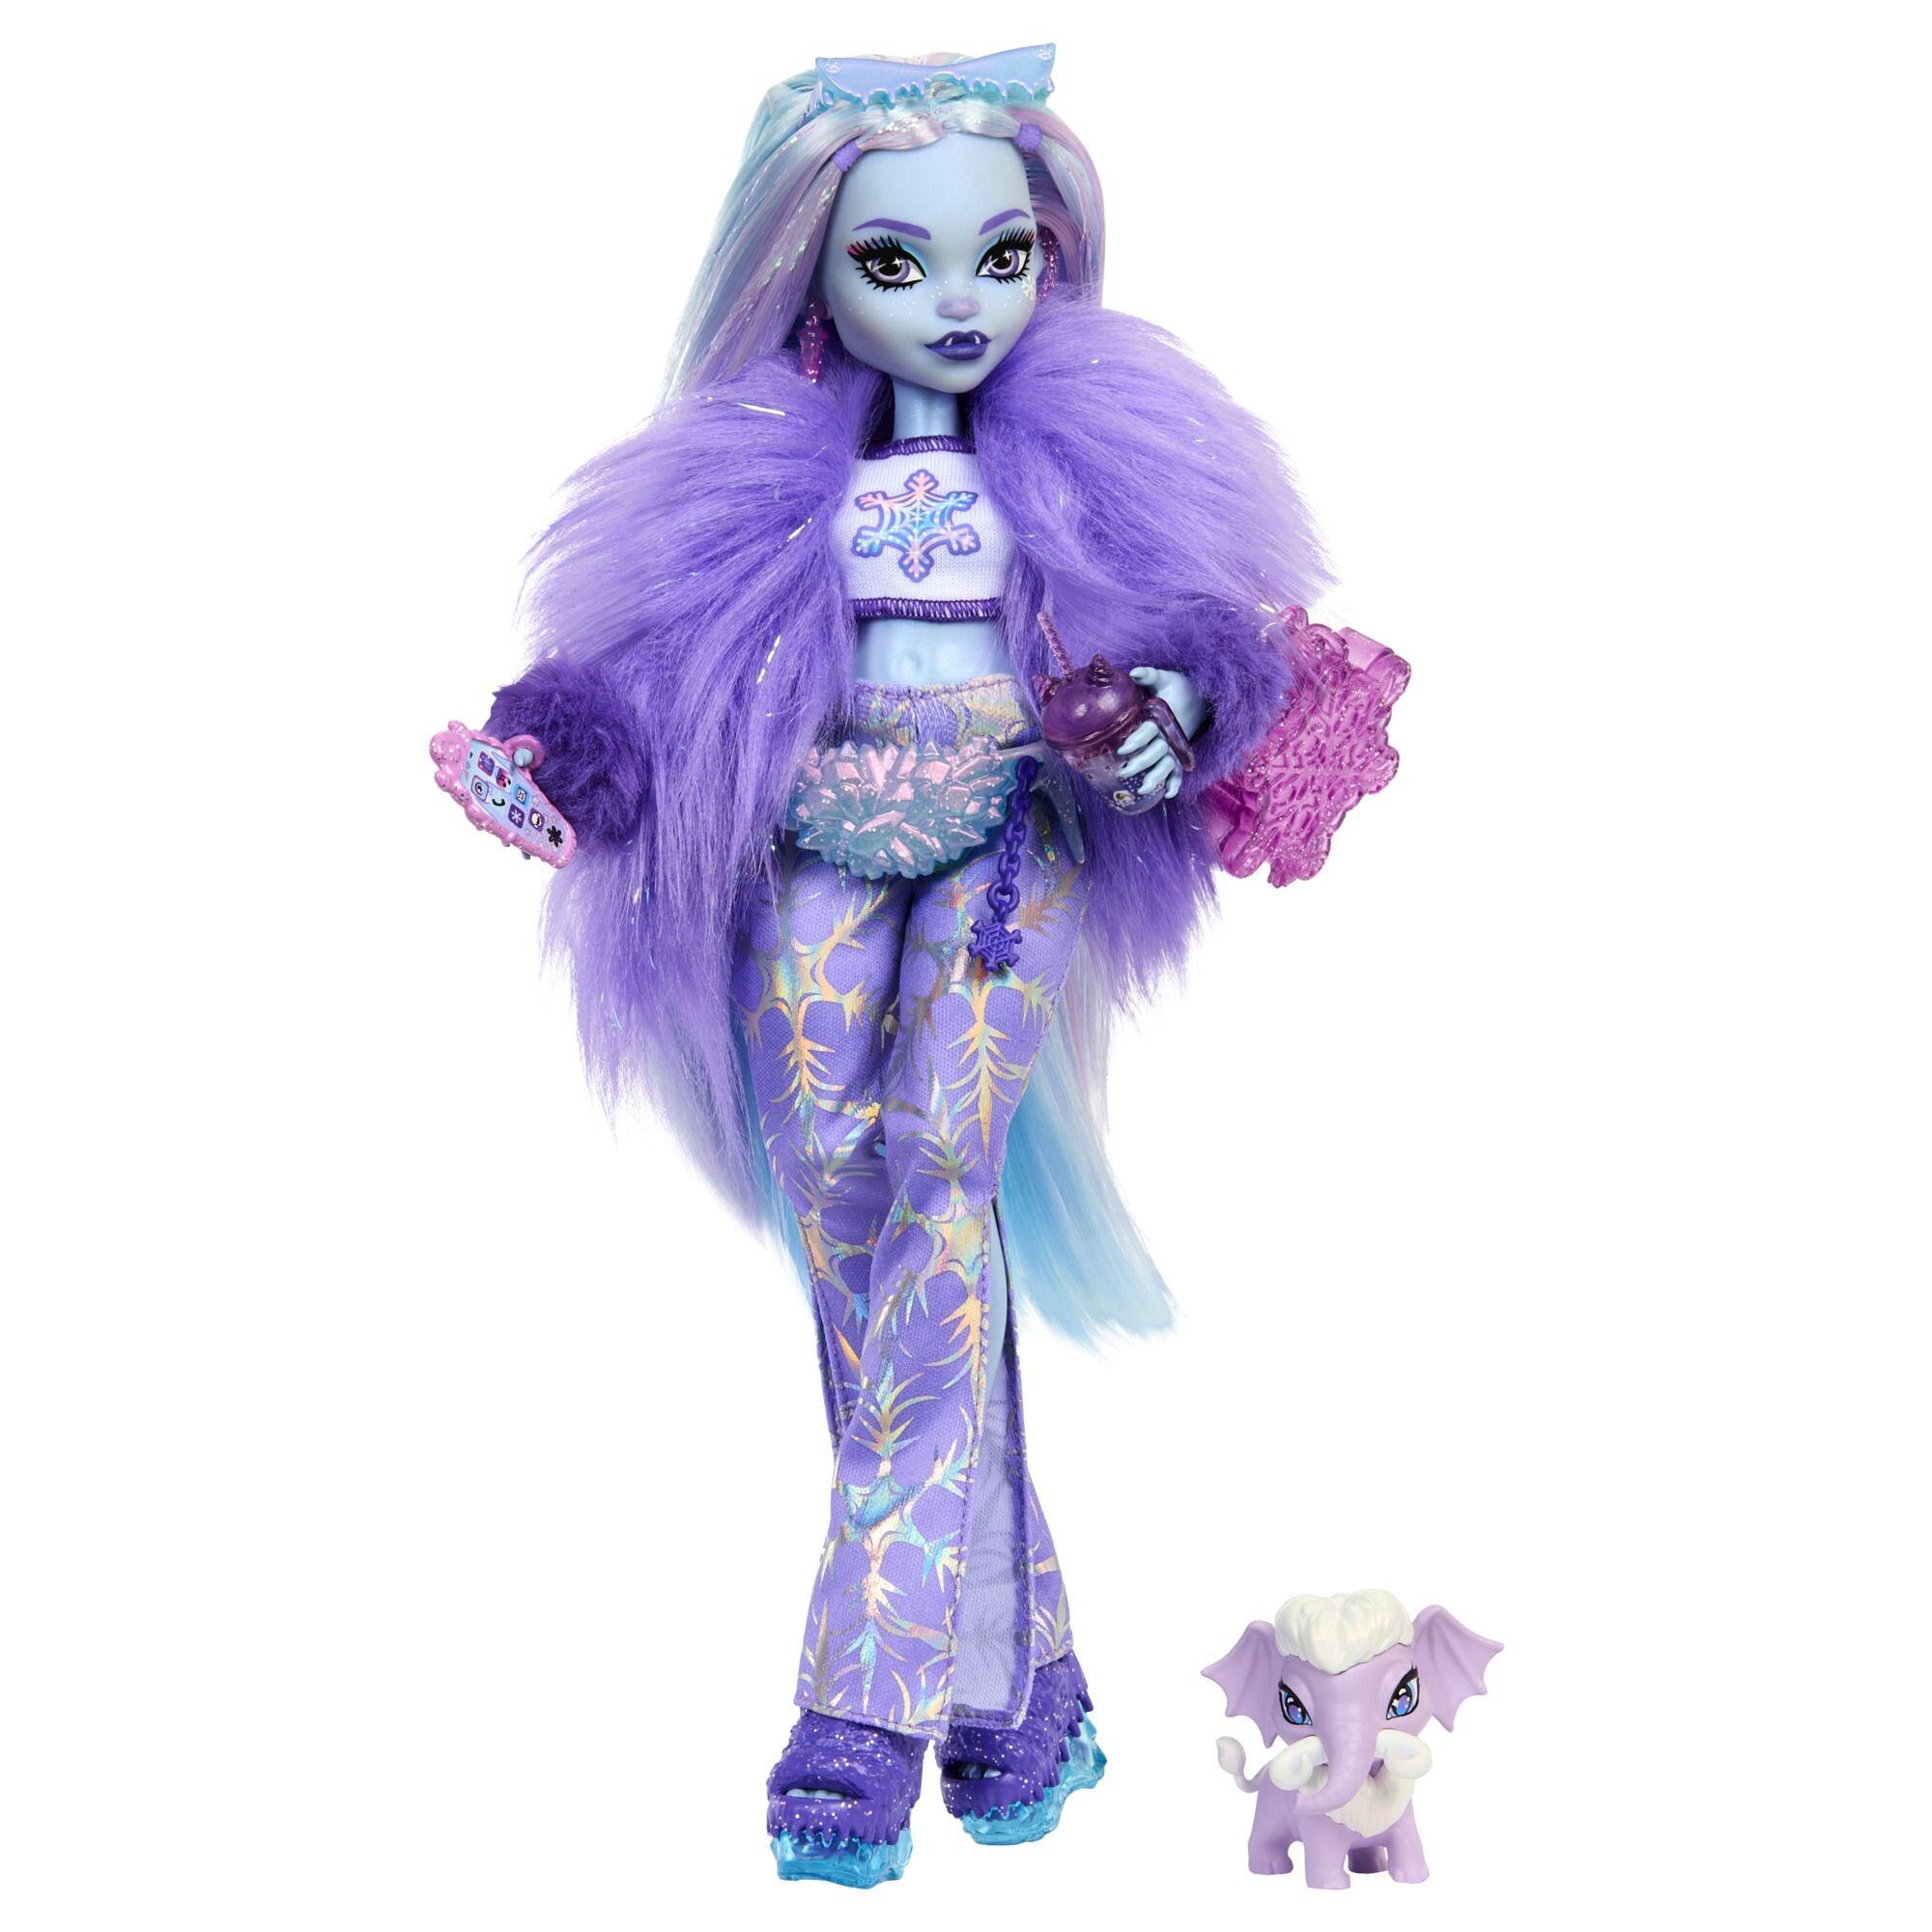 Monster High Abbey Bominable Fashion Doll